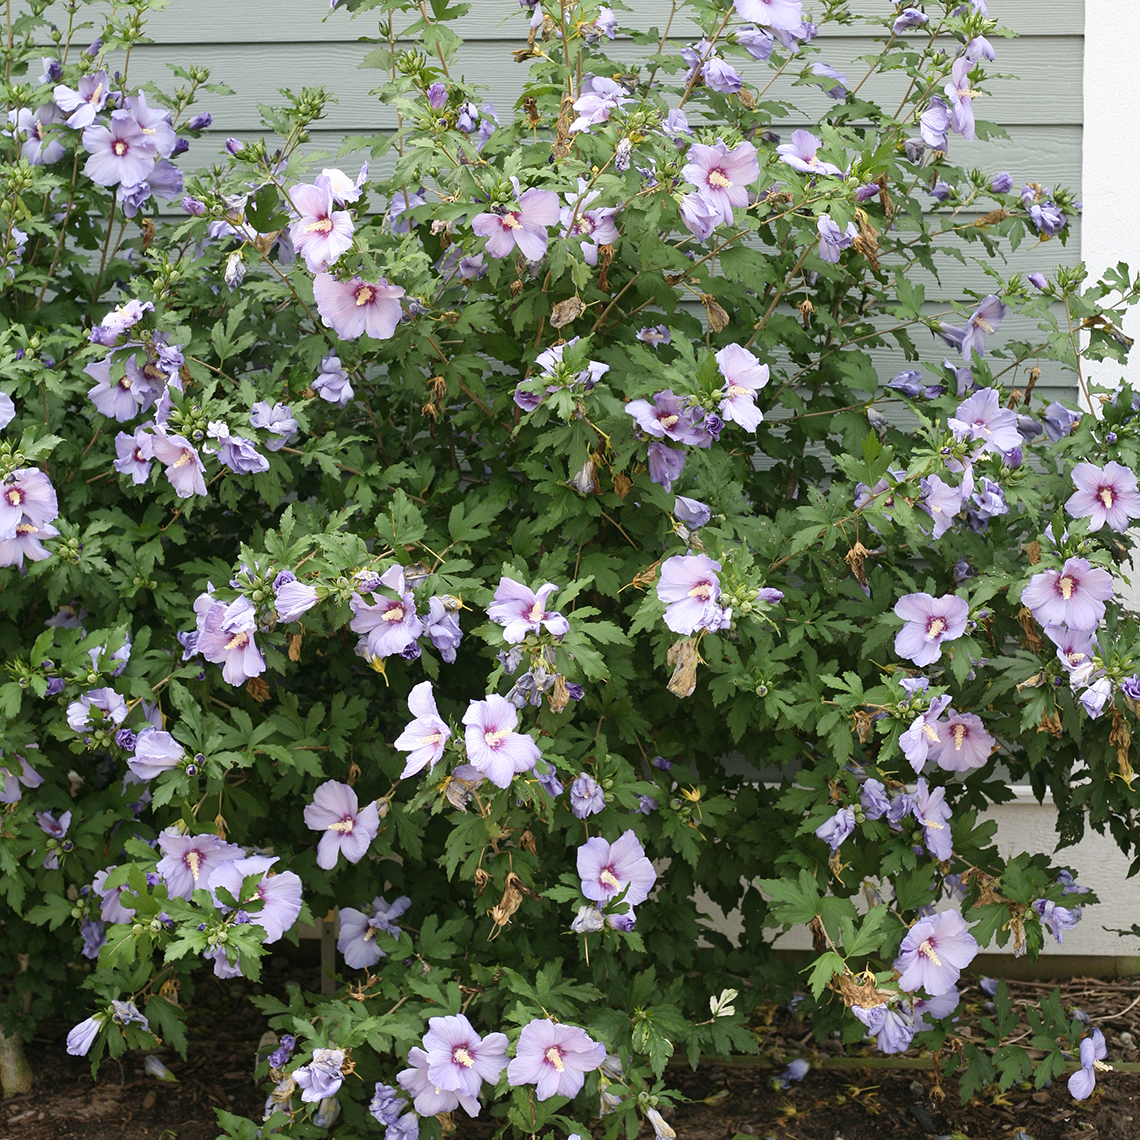 A specimen of Azurri Blue Satin rose of Sharon blooming against a grey wall